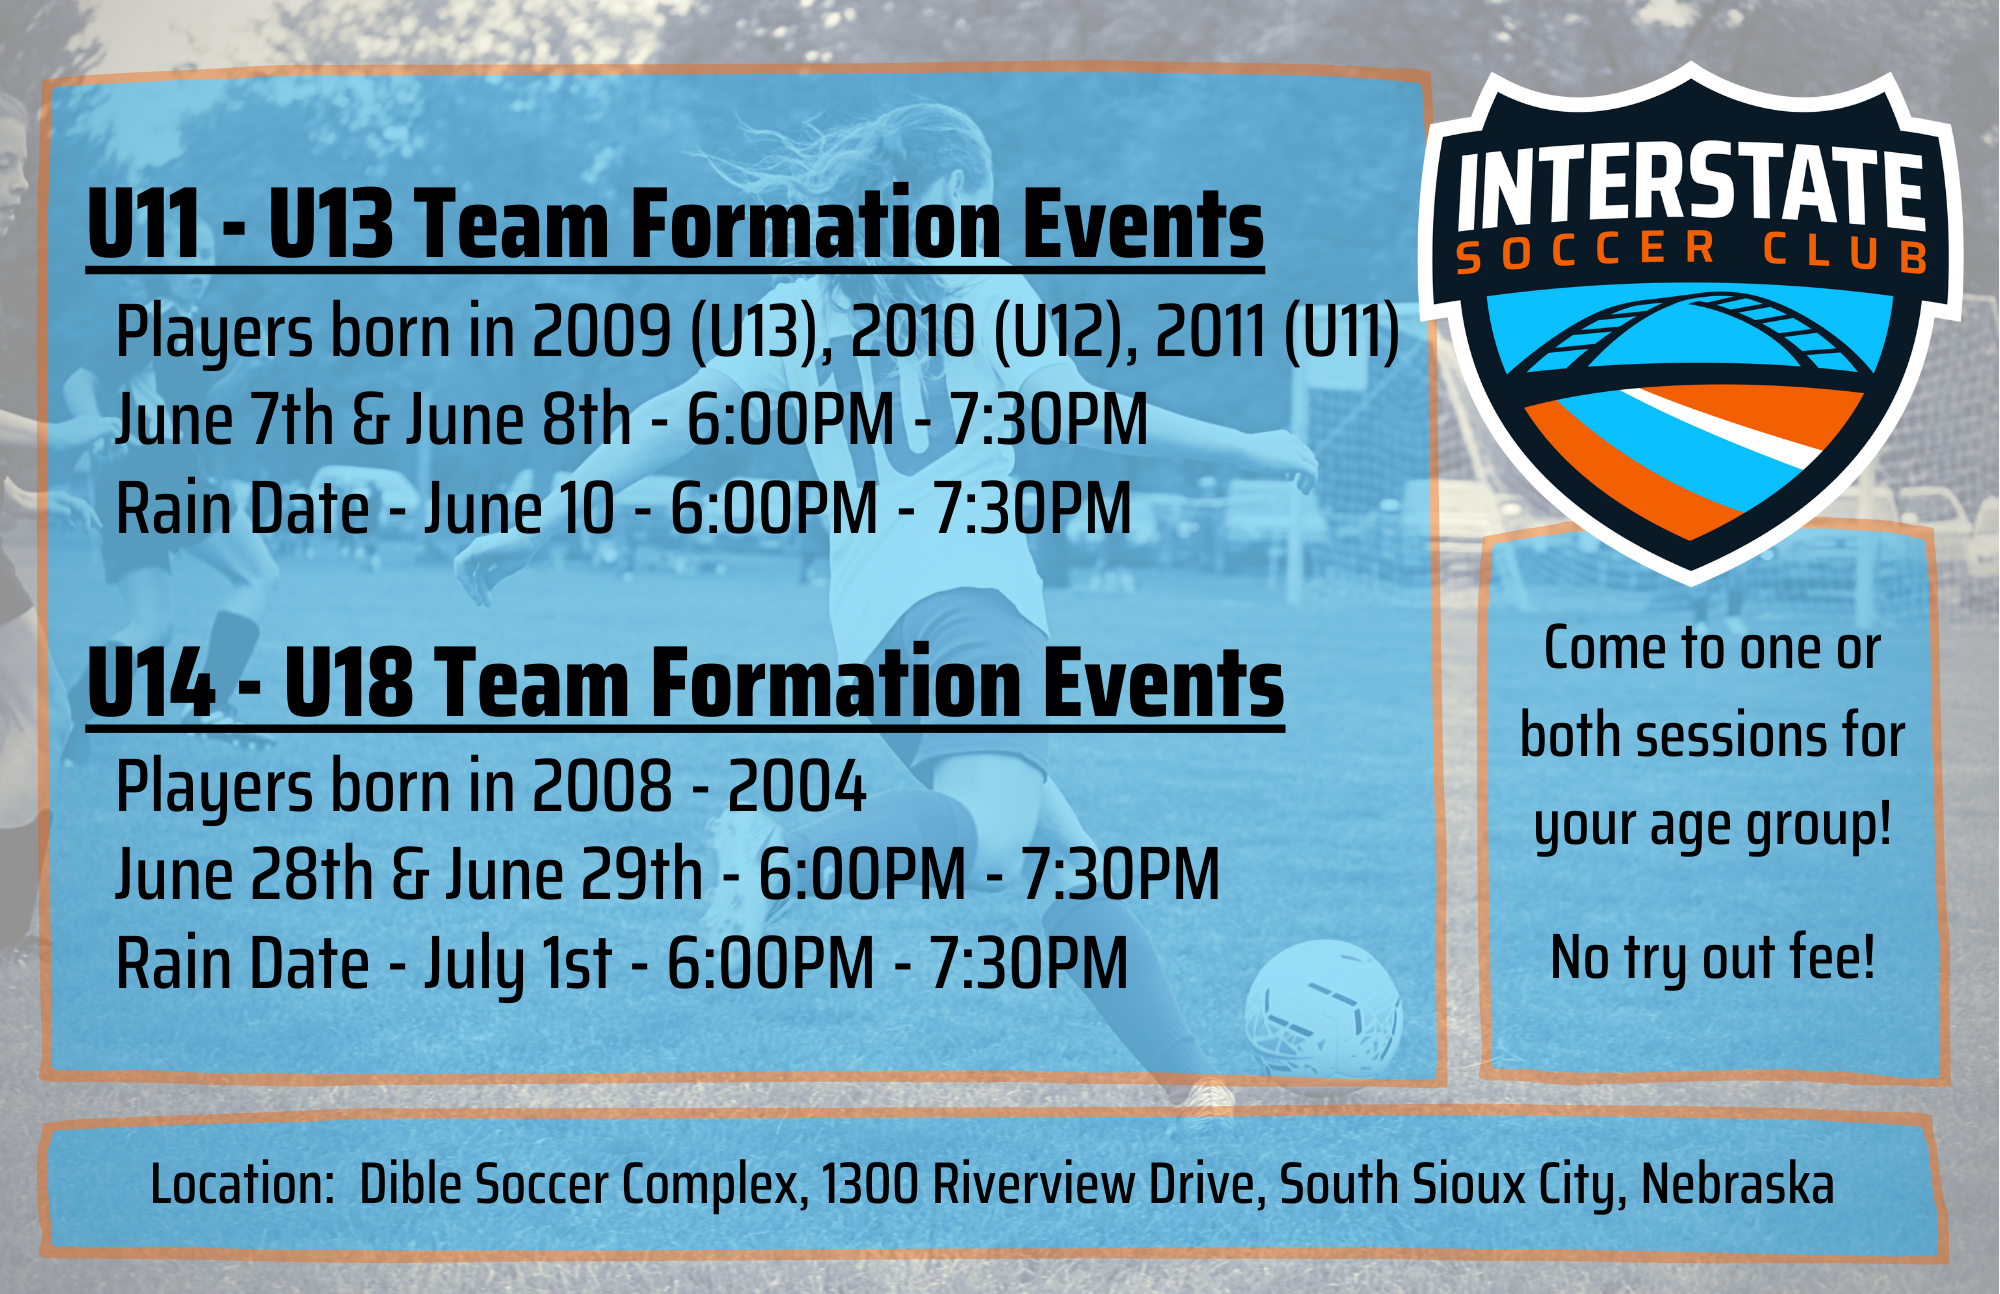 Tryout Dates Announced!